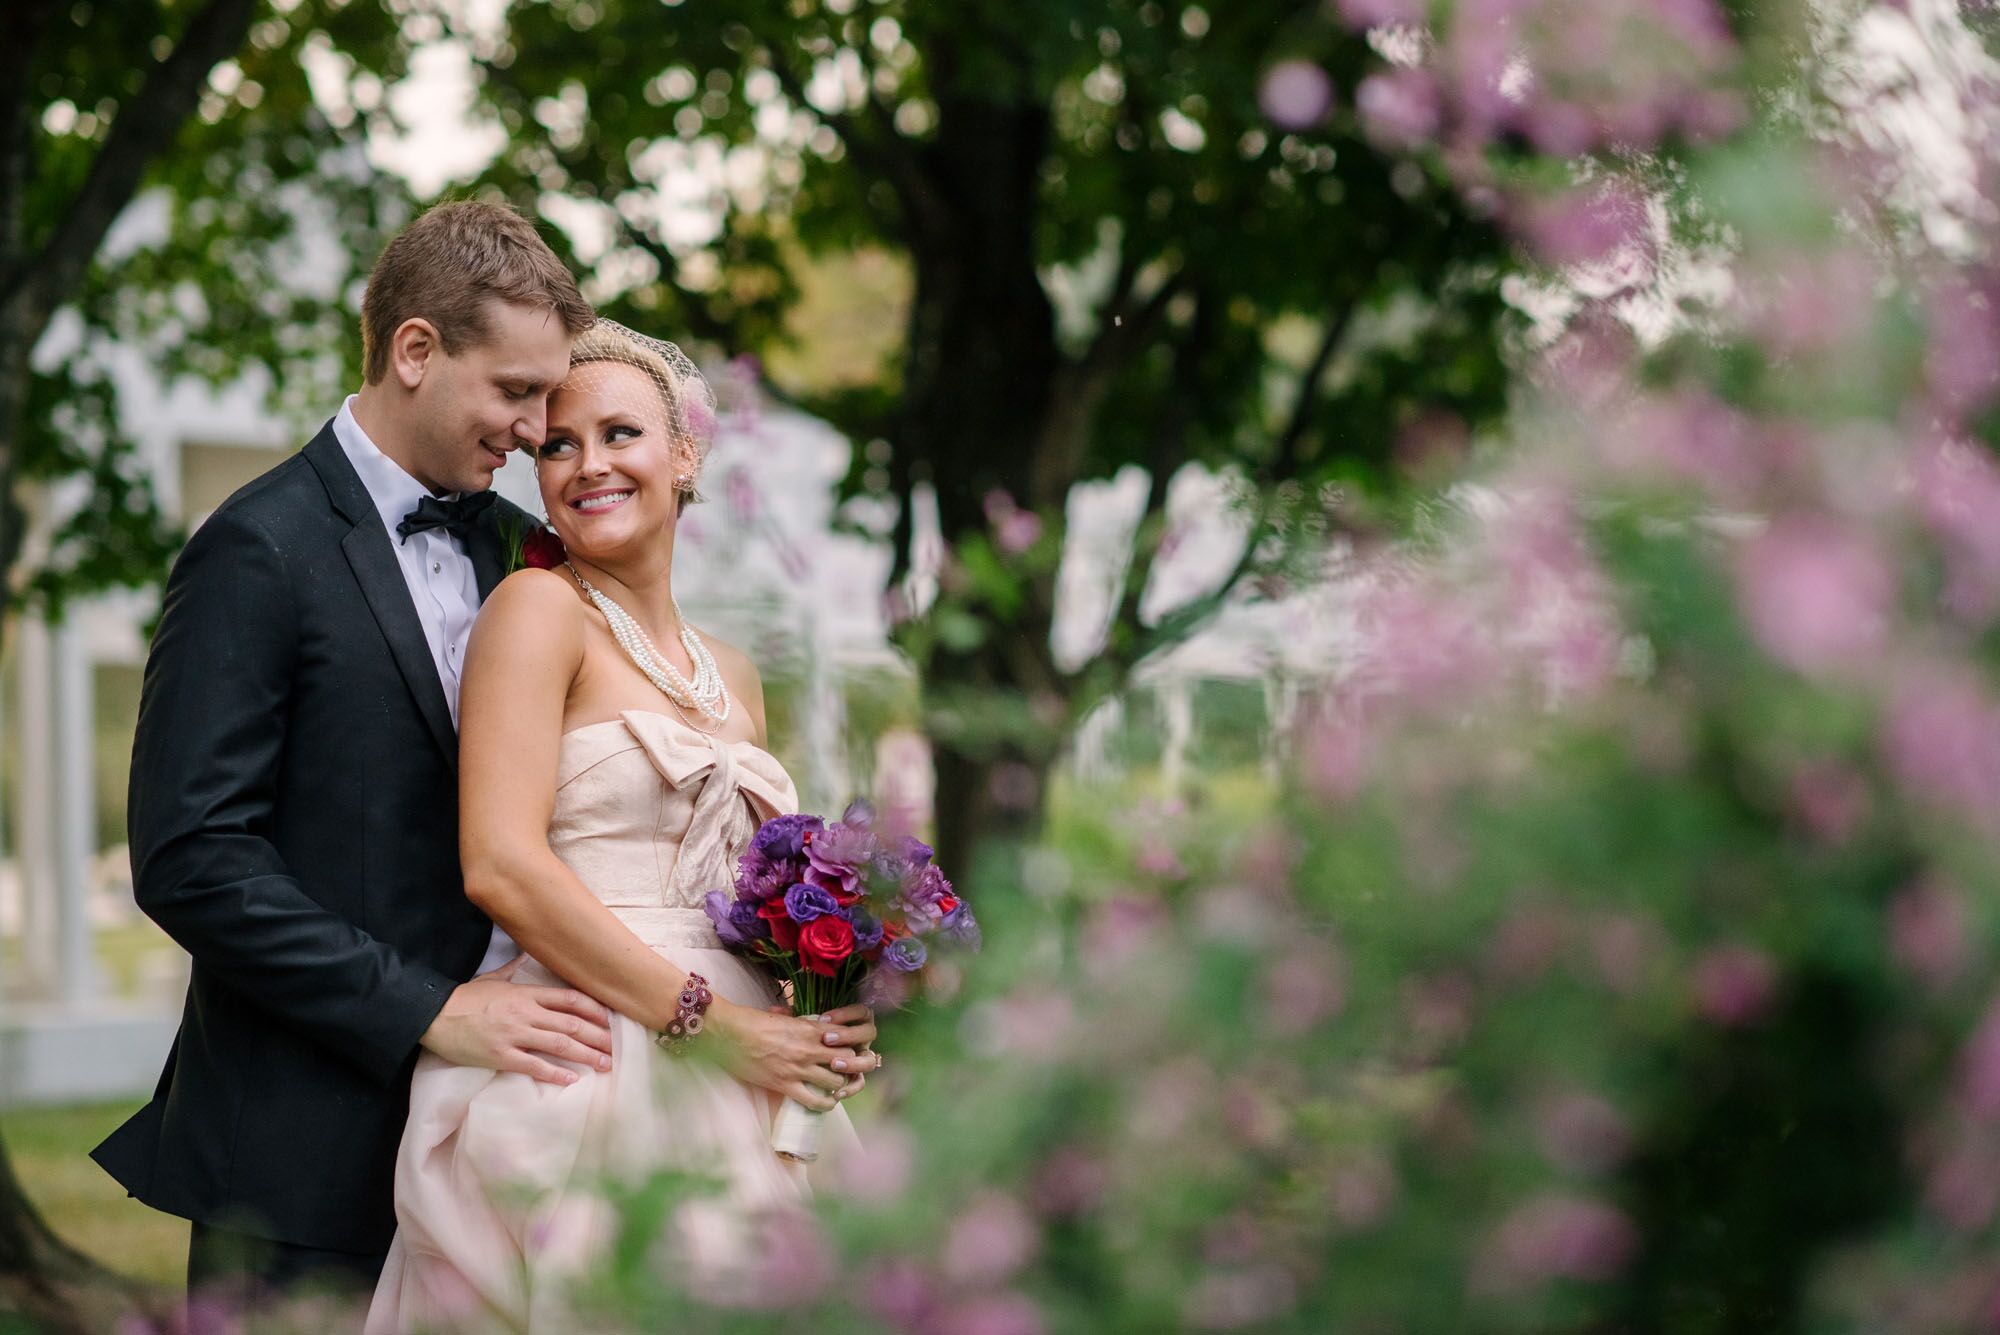 A Chic Blush Wedding at Franklin Park Conservatory and Botanical